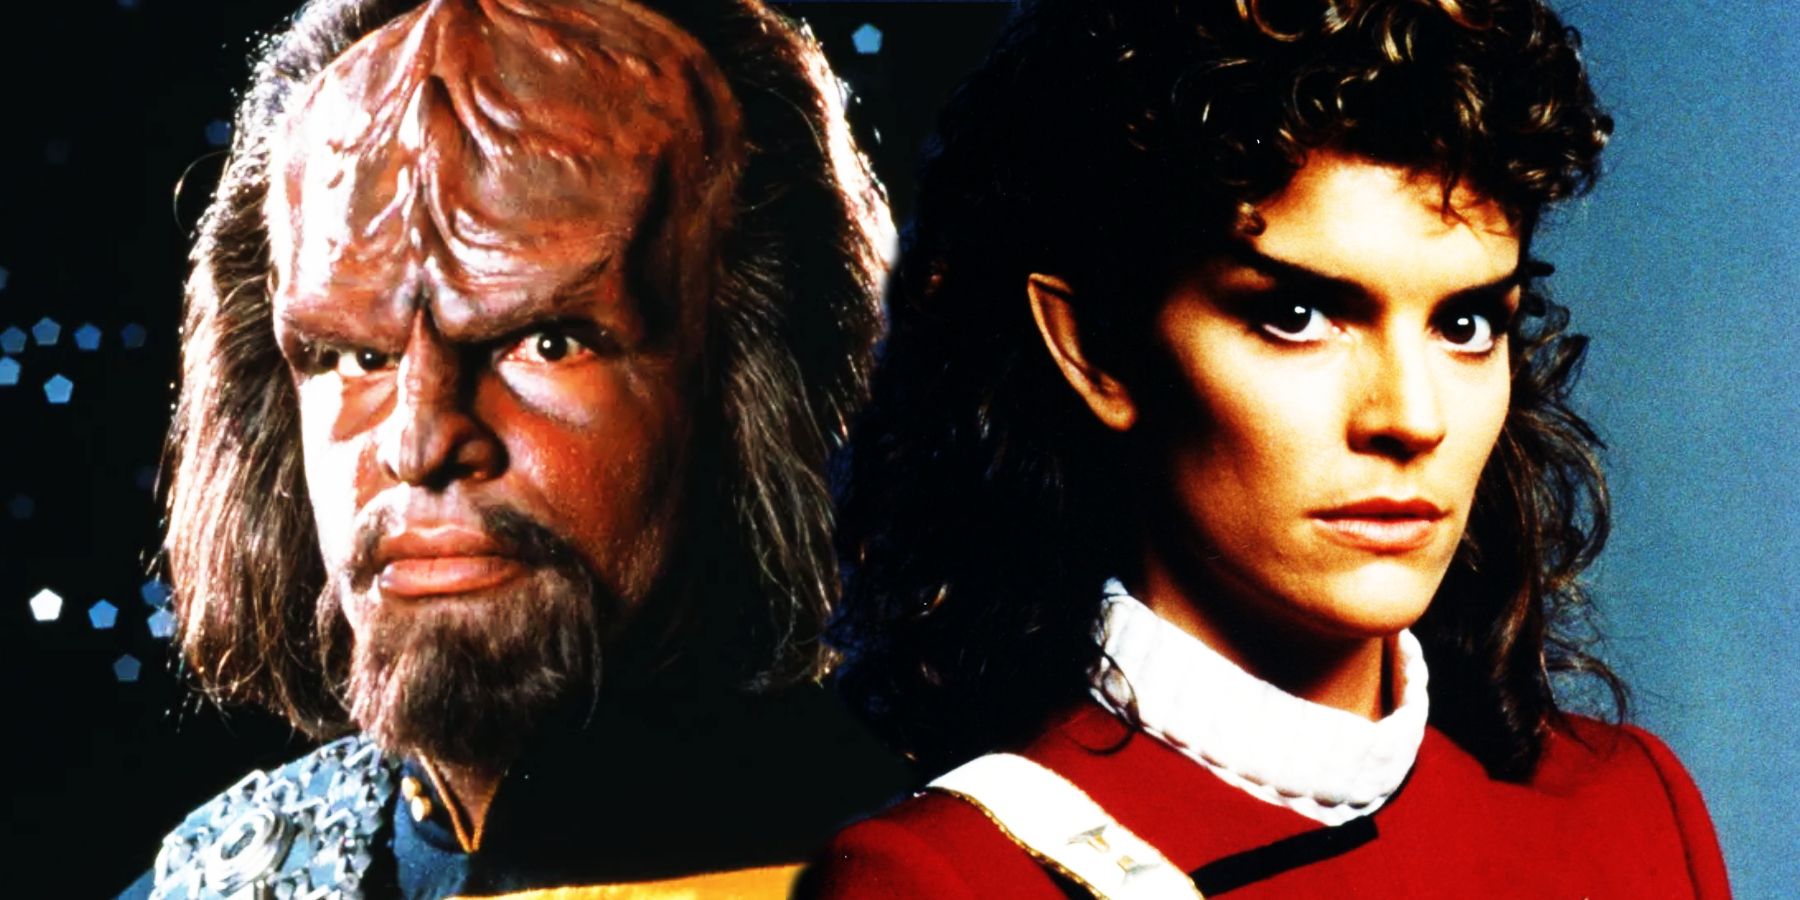 Michael Dorn as Worf and Robin Curtis as Saavik